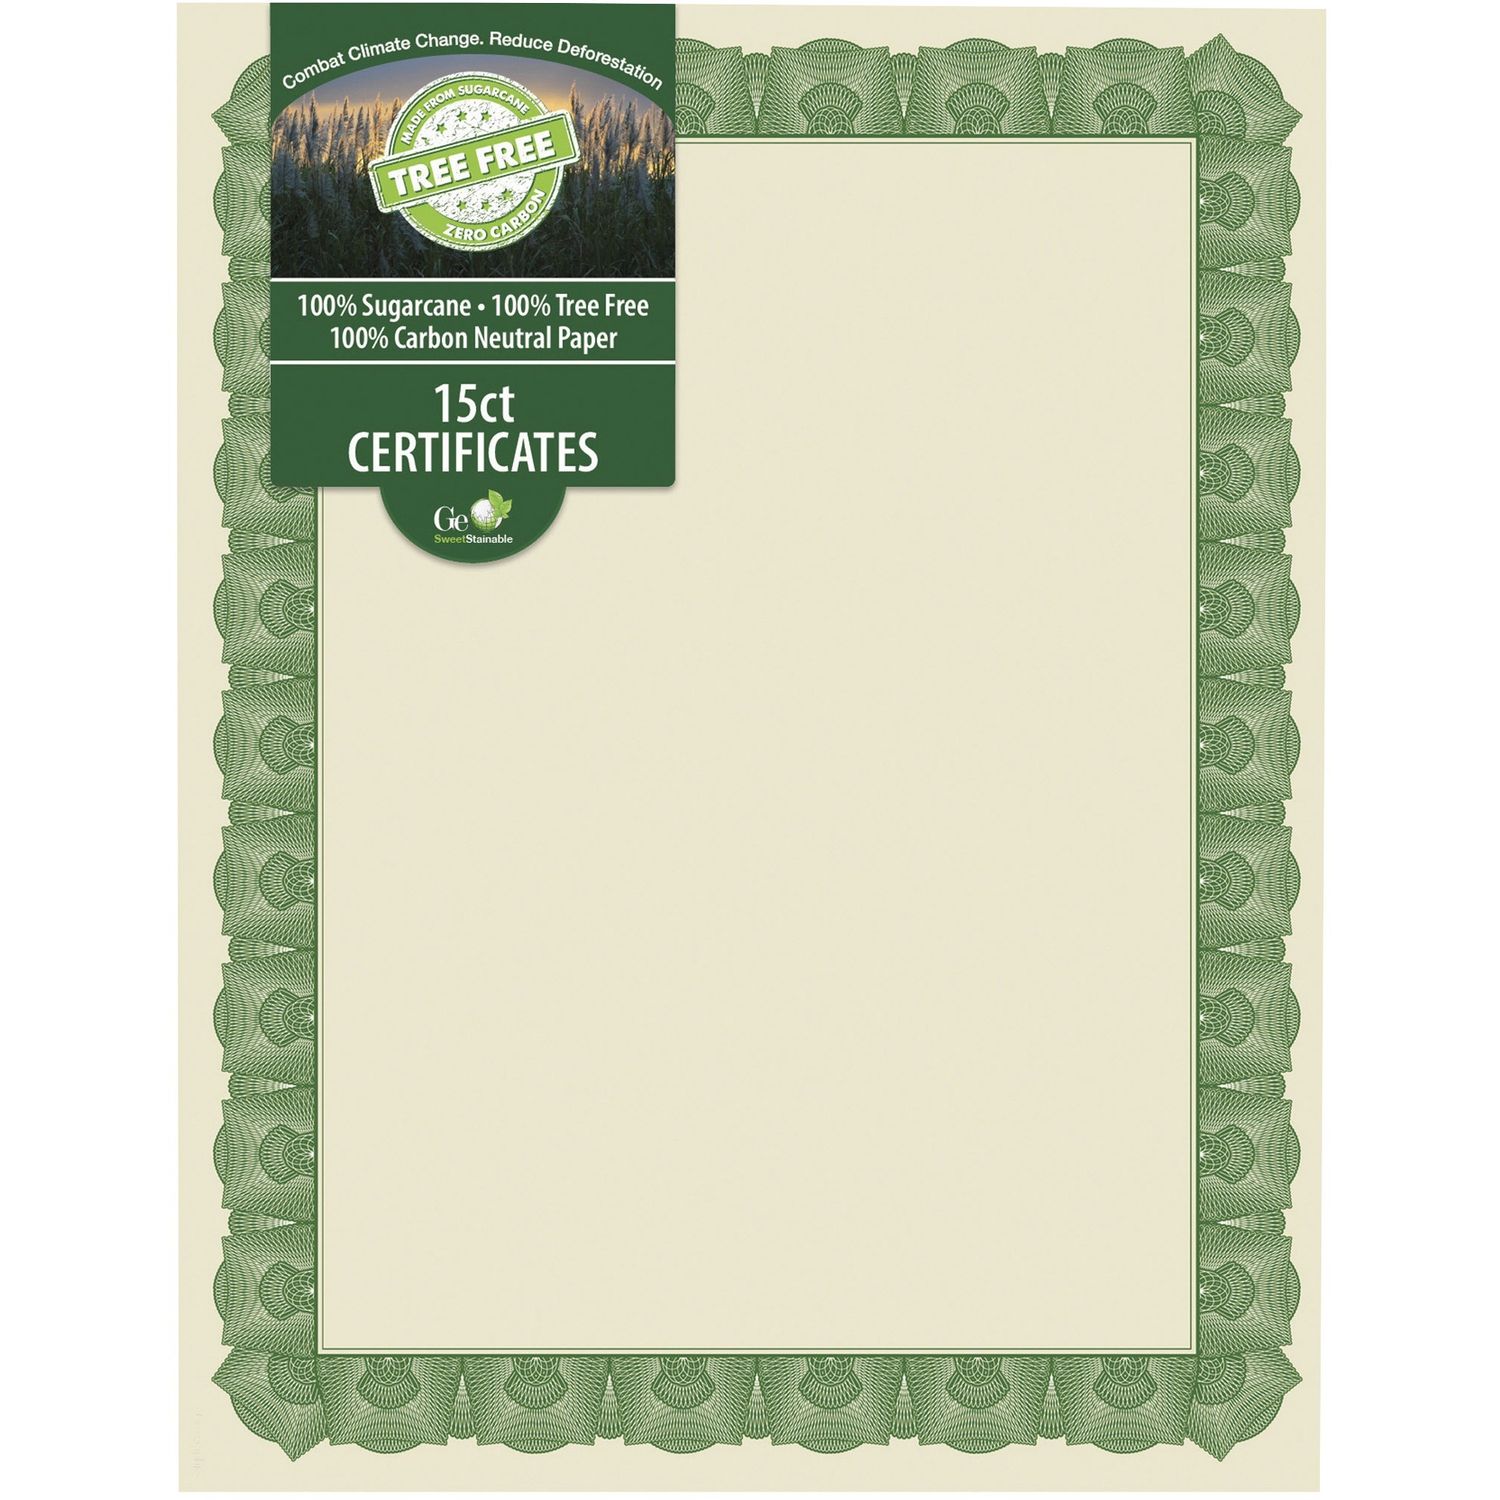 Tree Free Certificate 8.5", Multicolor with Green Border, Sugarcane, 1 Each